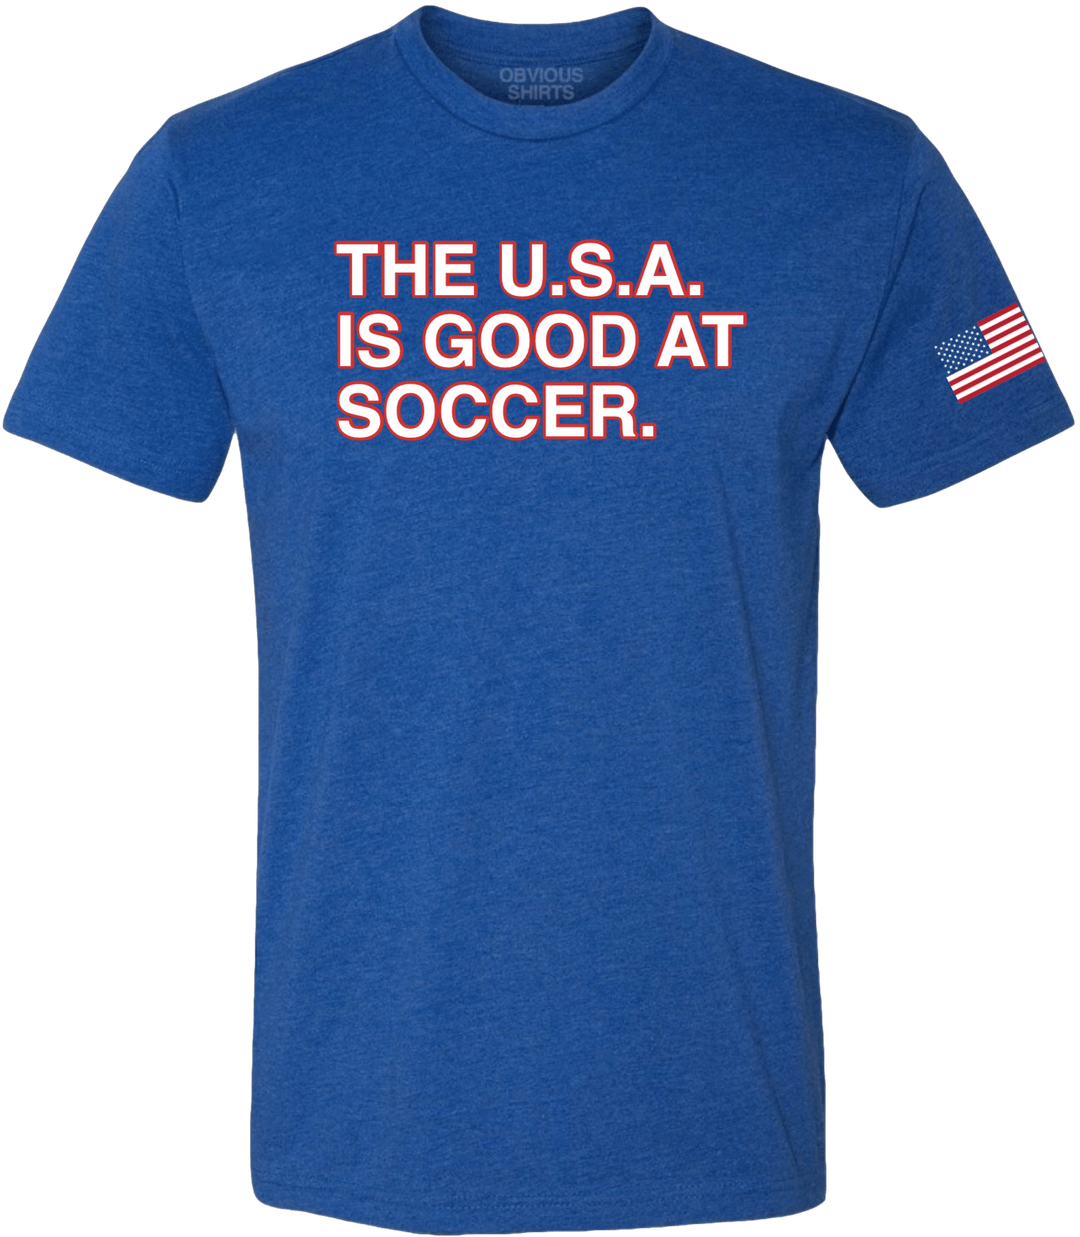 THE U.S.A. IS GOOD AT SOCCER. - OBVIOUS SHIRTS